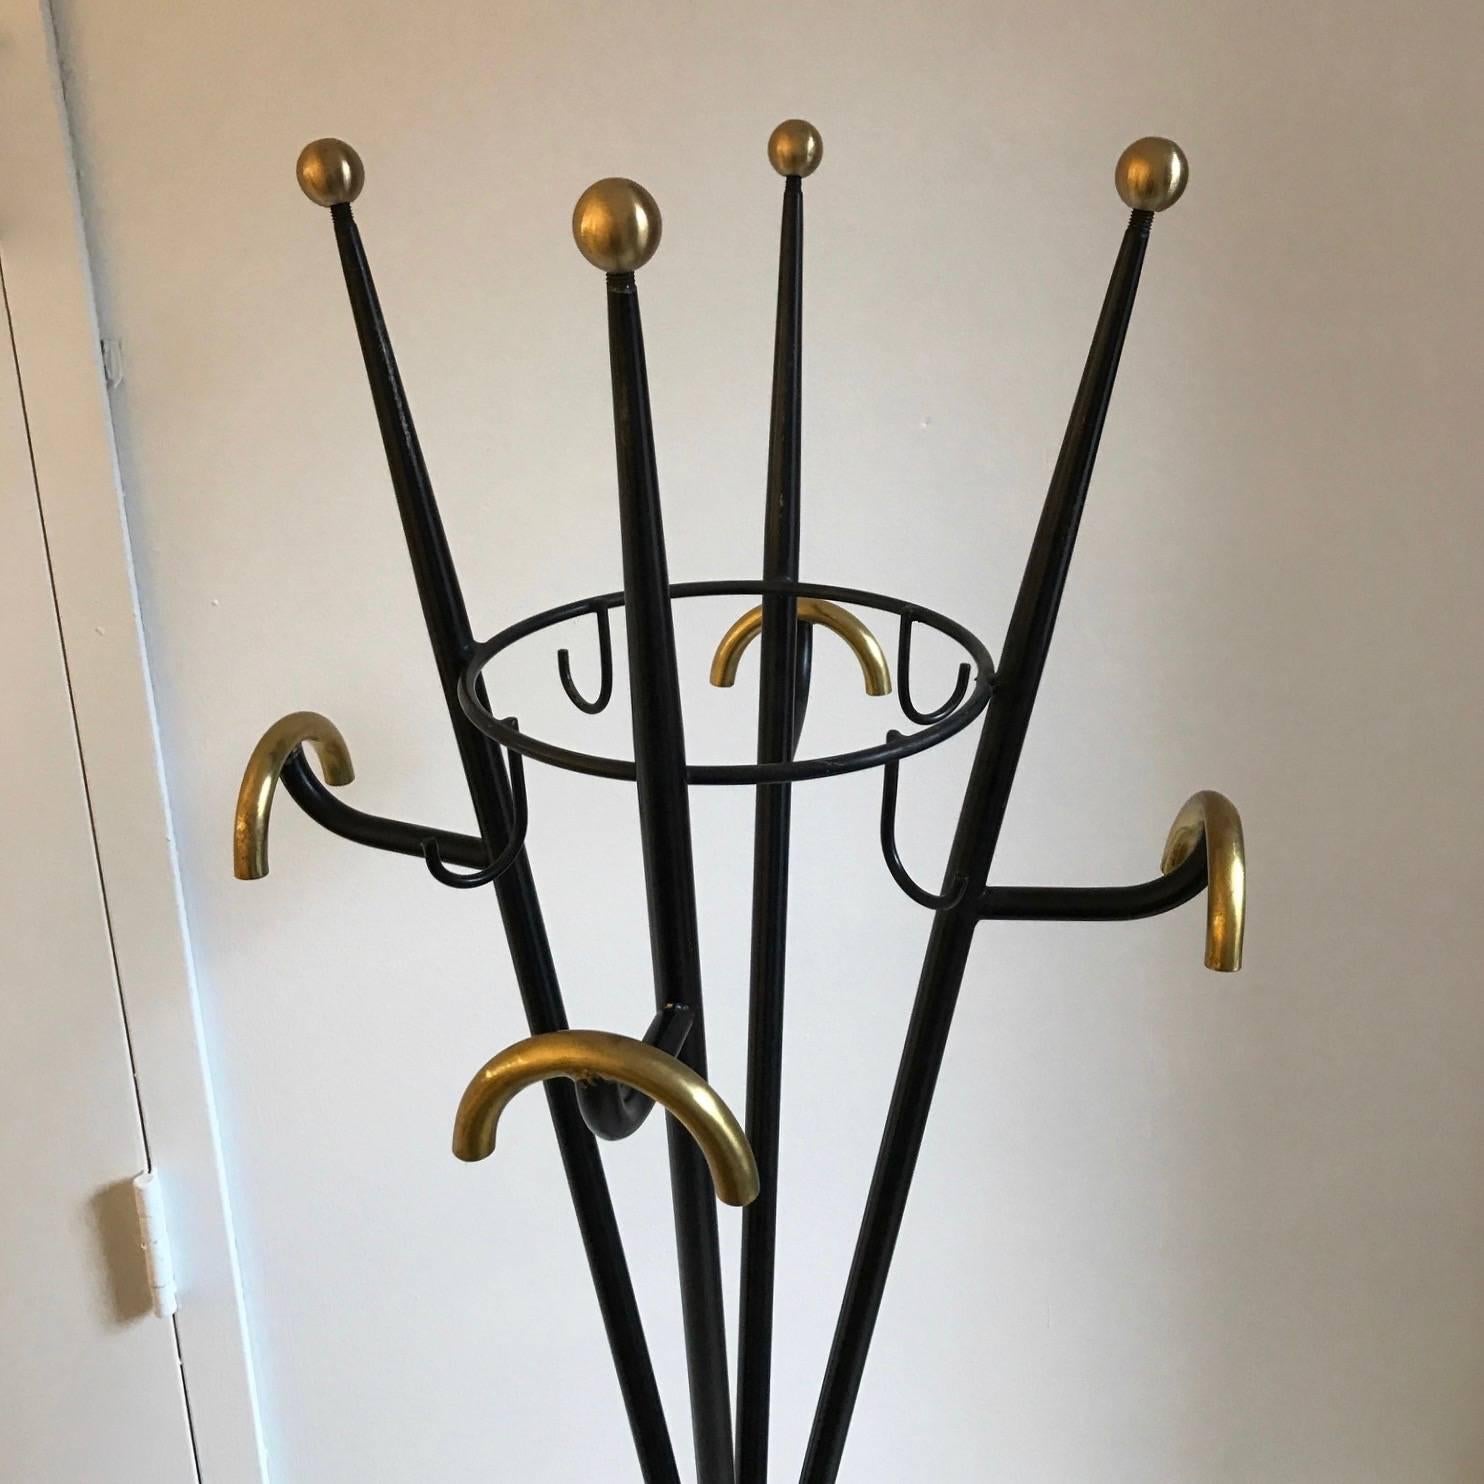 Hand-Crafted 1980s Italian Modern Black Lacquered and Gold Brass Coat Rack or Umbrella Stand